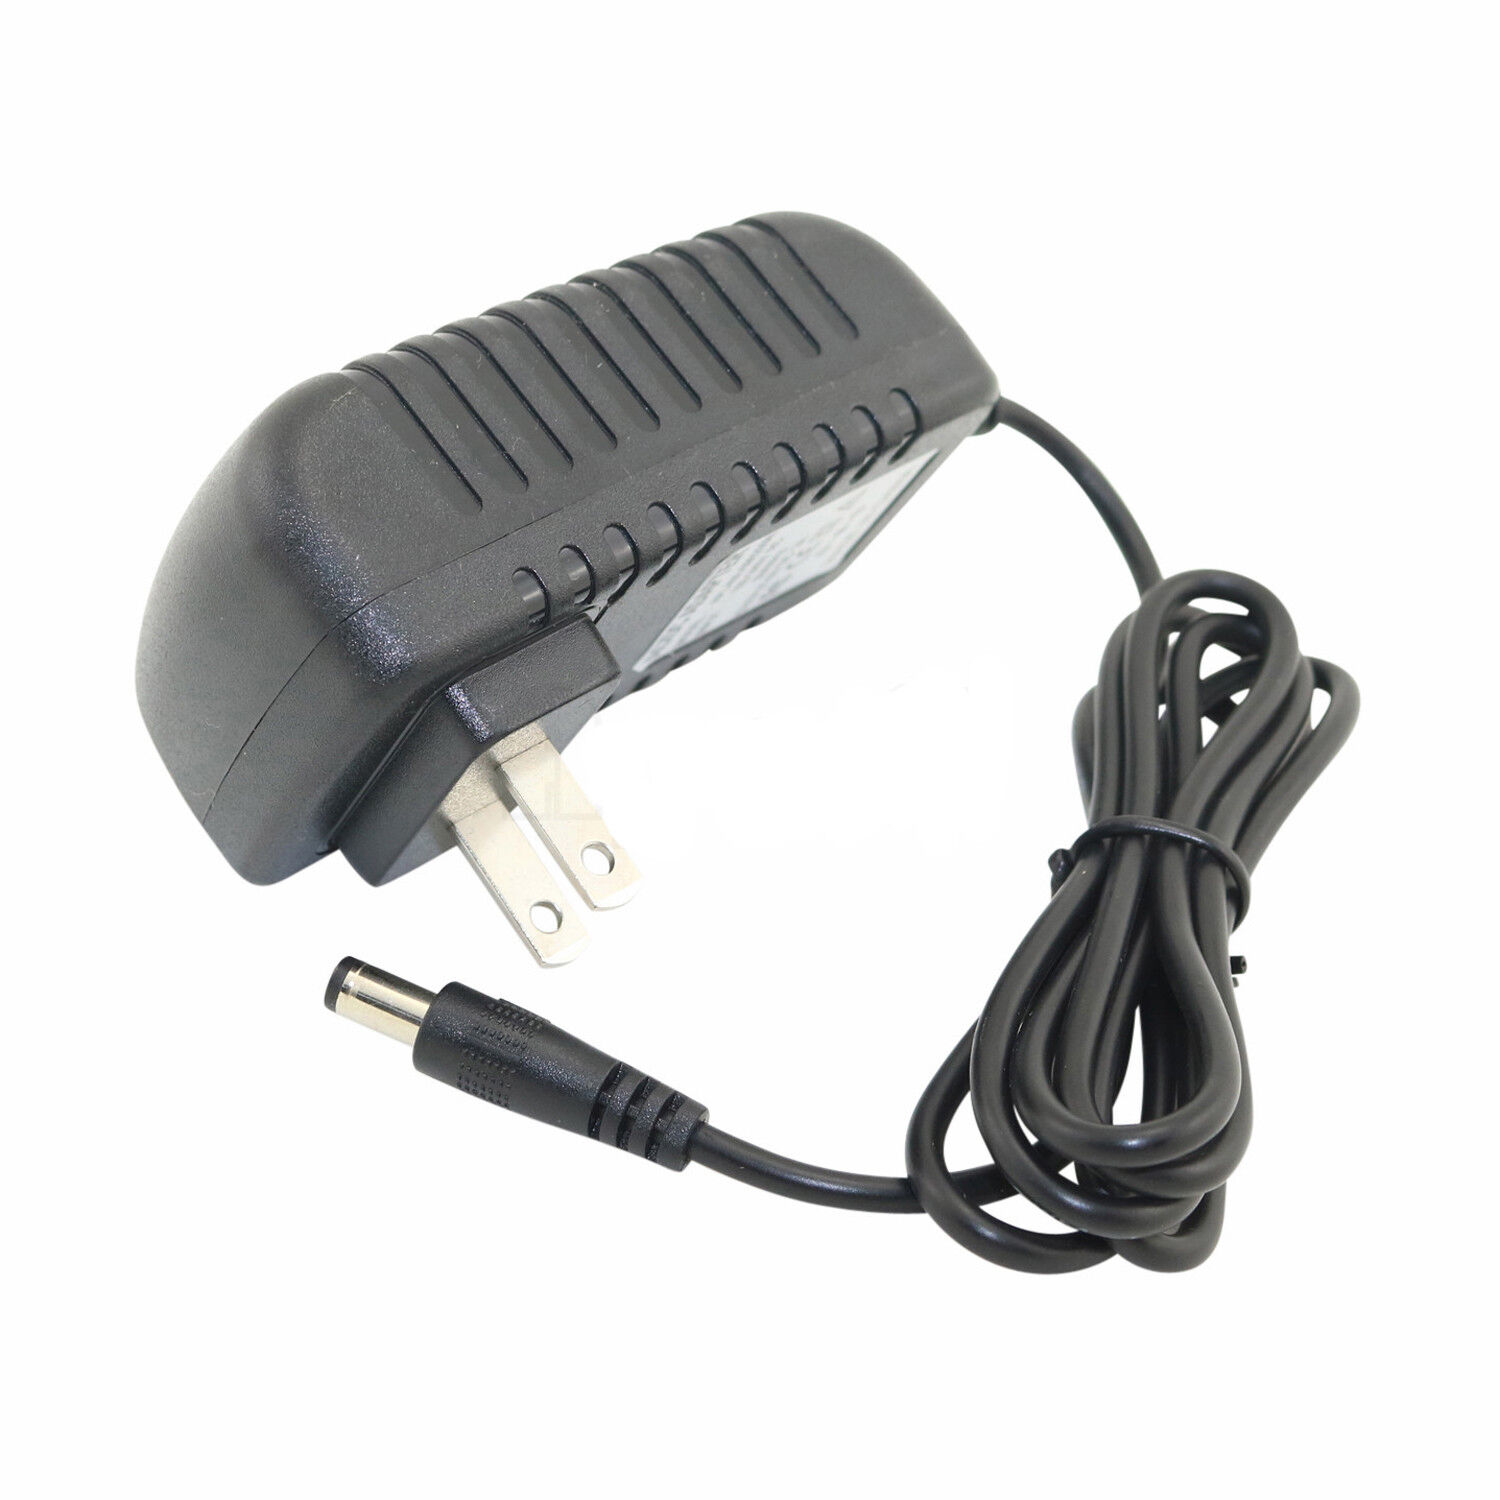 AC Power Supply Adapter for Horizon Fitness Comfort Recumbent Exercise Bikes Country/Region of Manufacture China Type A